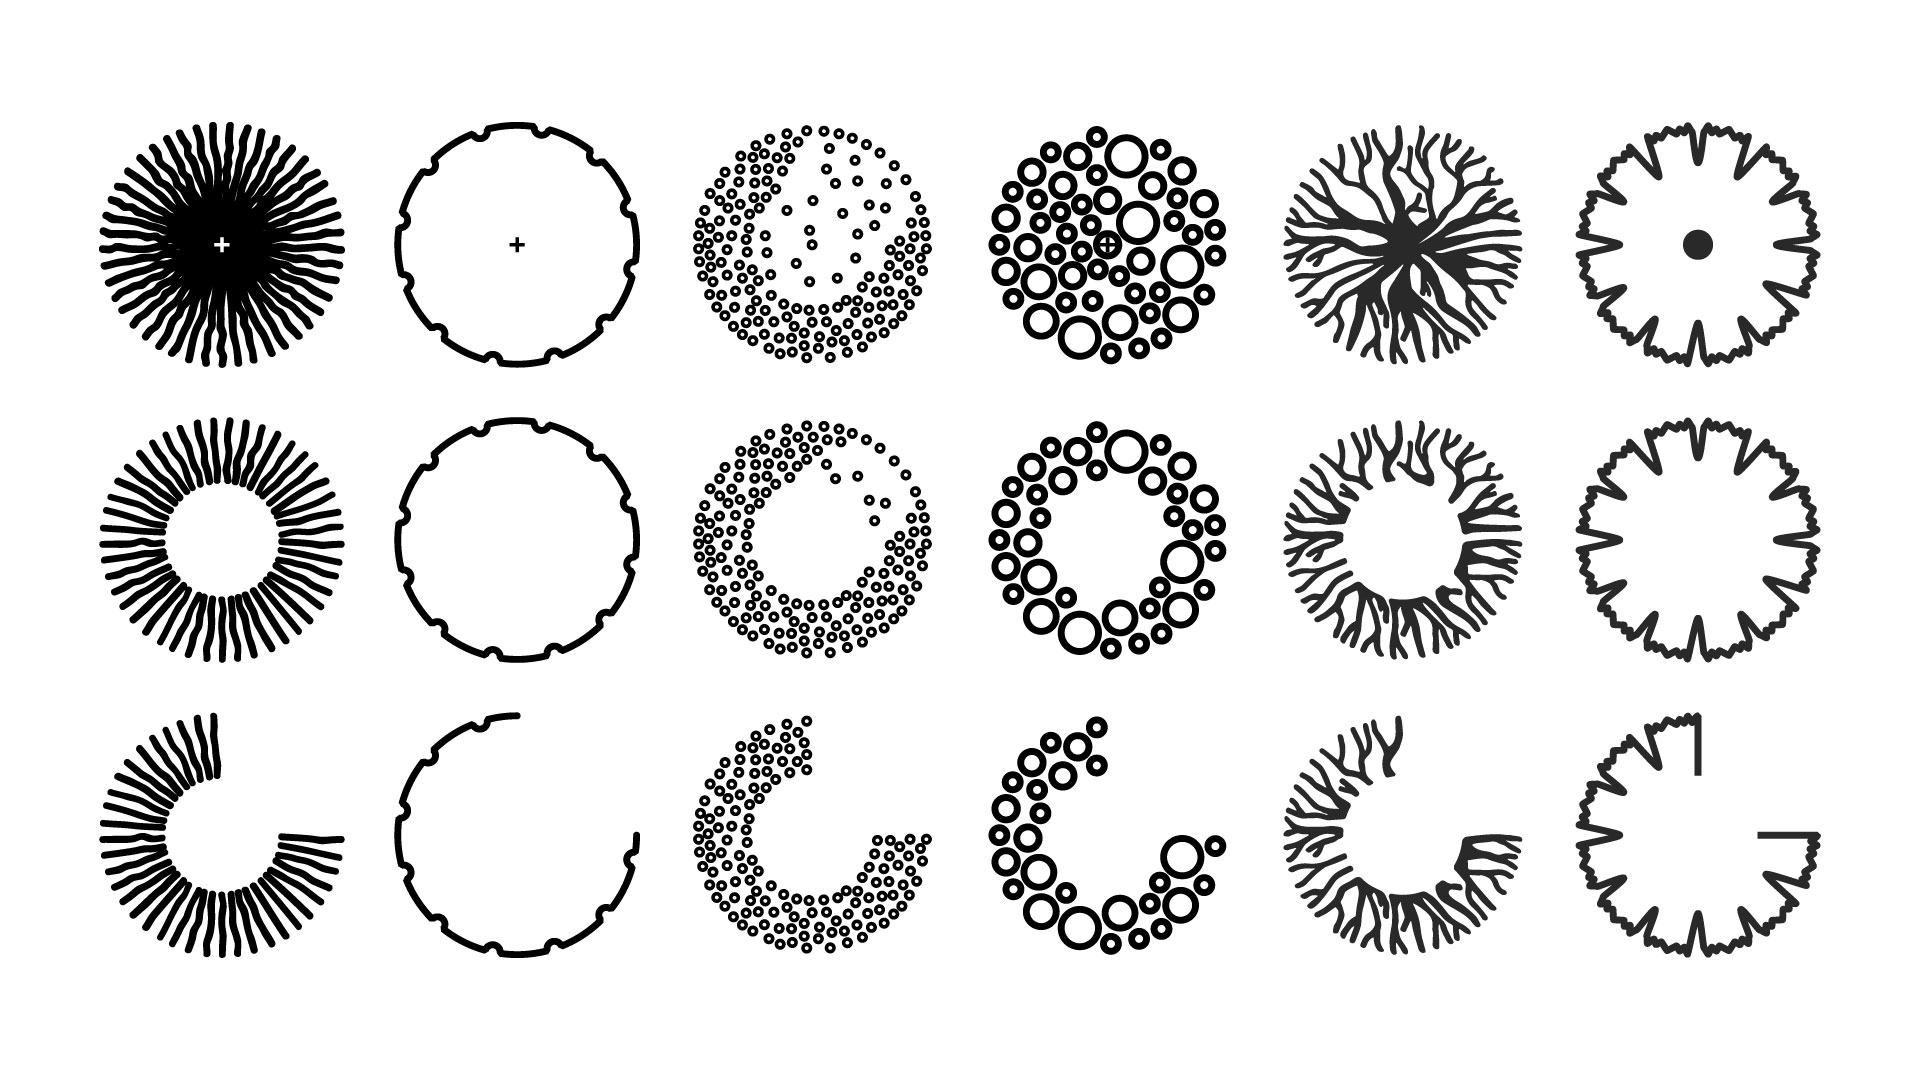 Iconography of six different styles of shrubs designed as part of CLLA's atomic design system